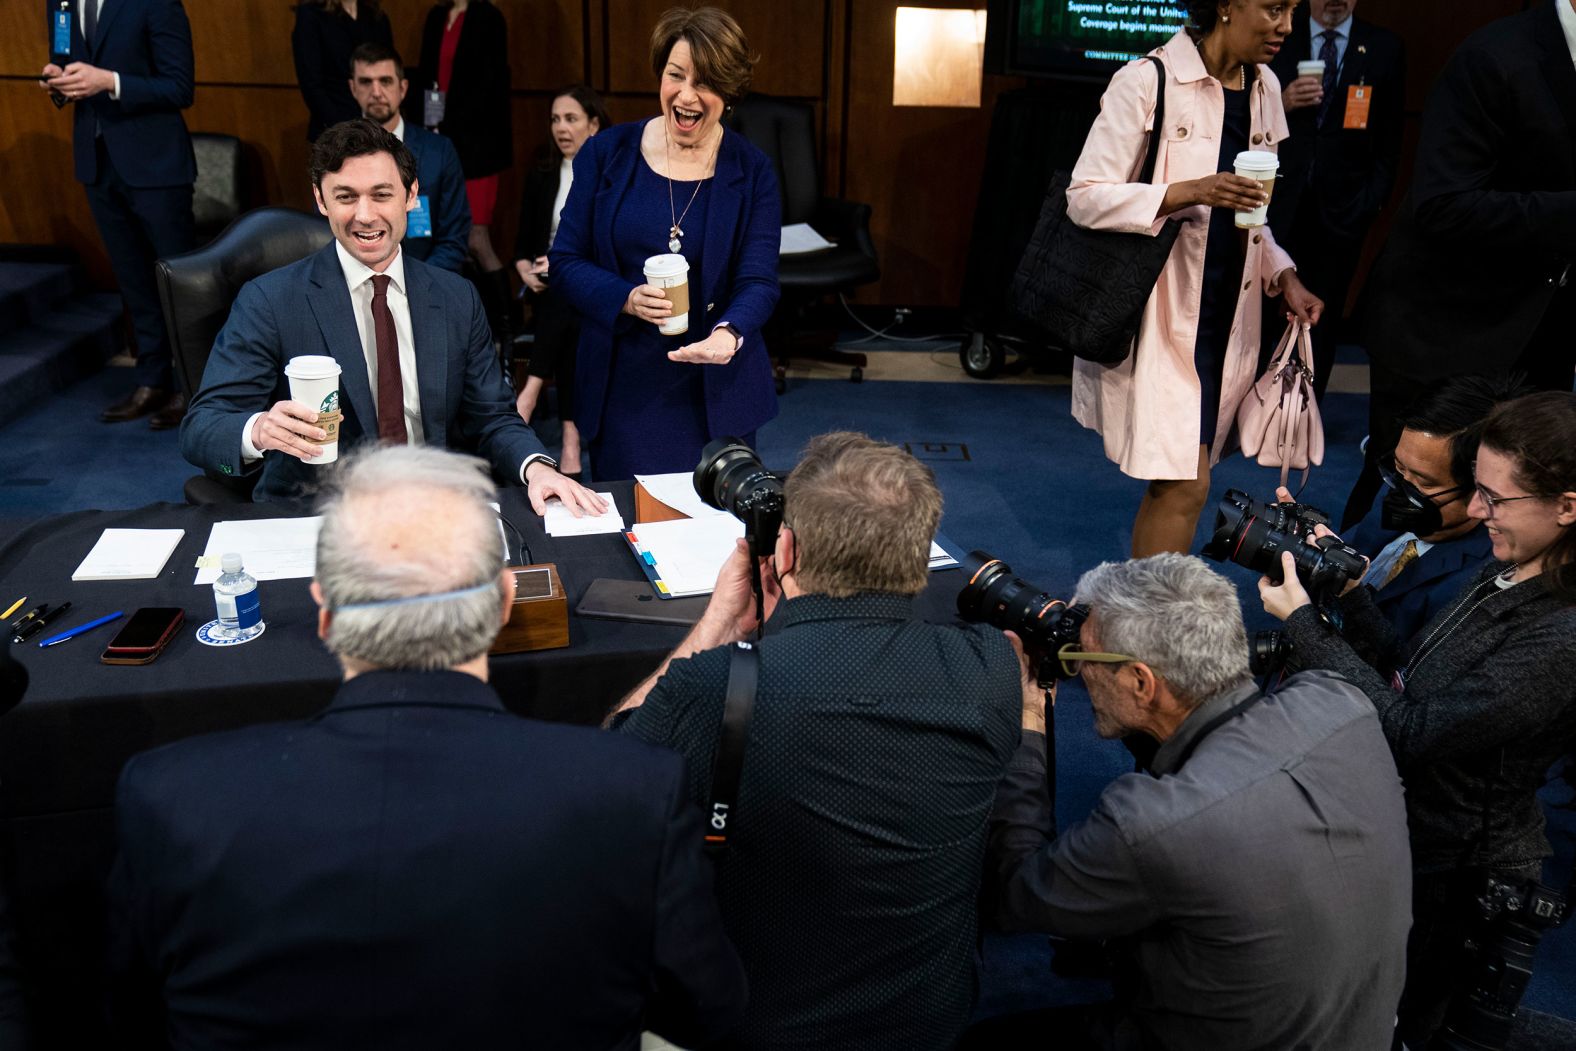 US Sens. Jon Ossoff and Amy Klobuchar joke with photographers ahead of the hearing on March 23. "It's a funny relationship to sit next to people for upwards of 12 hours without speaking," photographer Sarah Silbiger said. "We're always grateful when a lawmaker breaks the fourth wall to share a laugh."